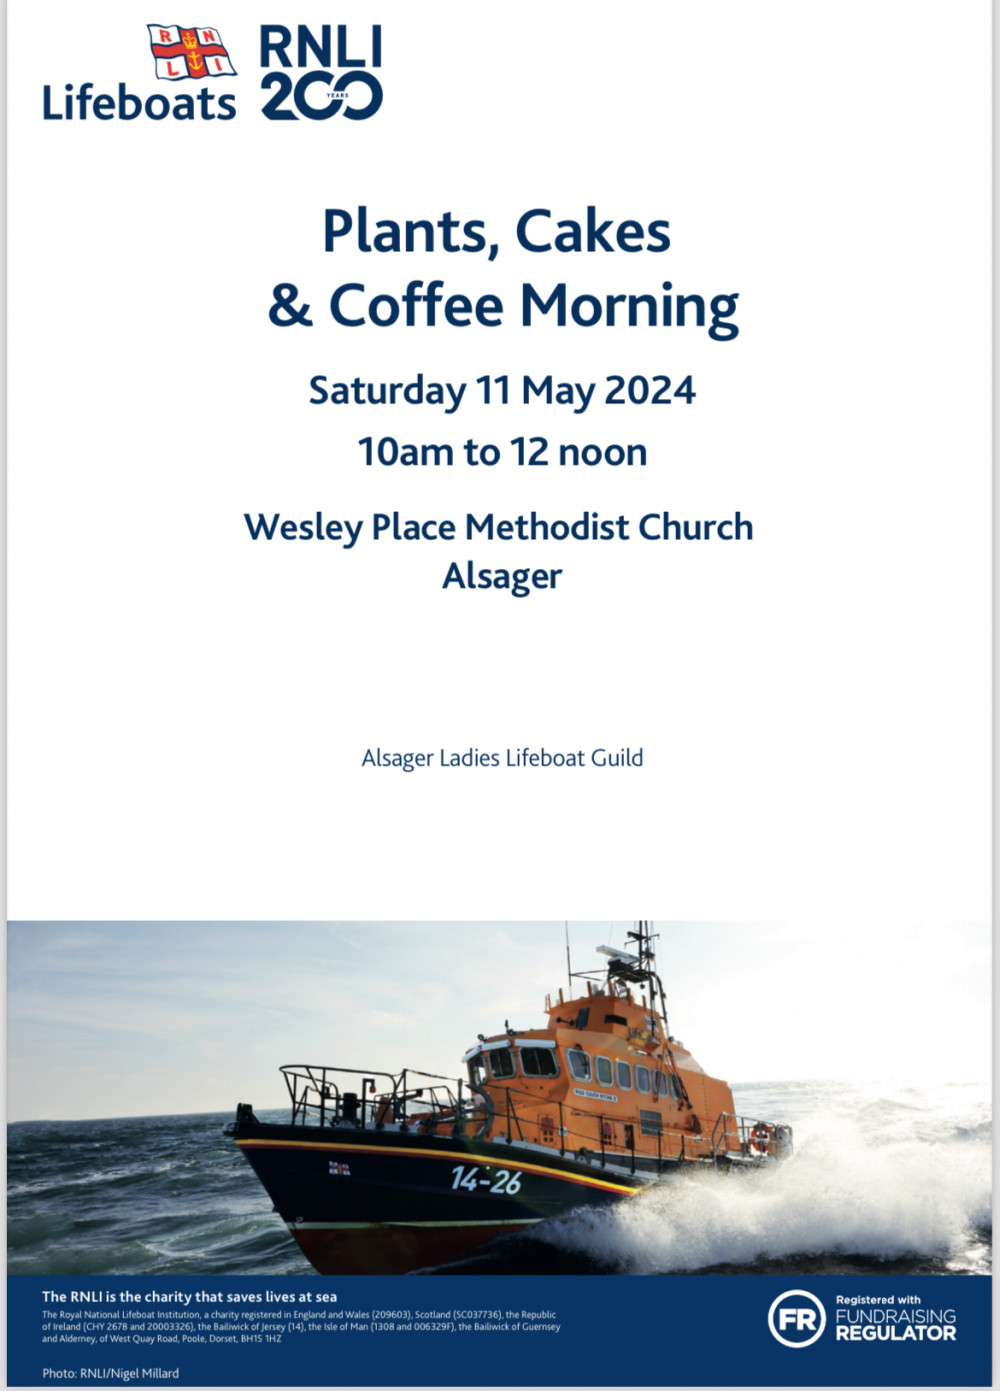 Plants, Cakes and Coffee Morning in aid of RNLI